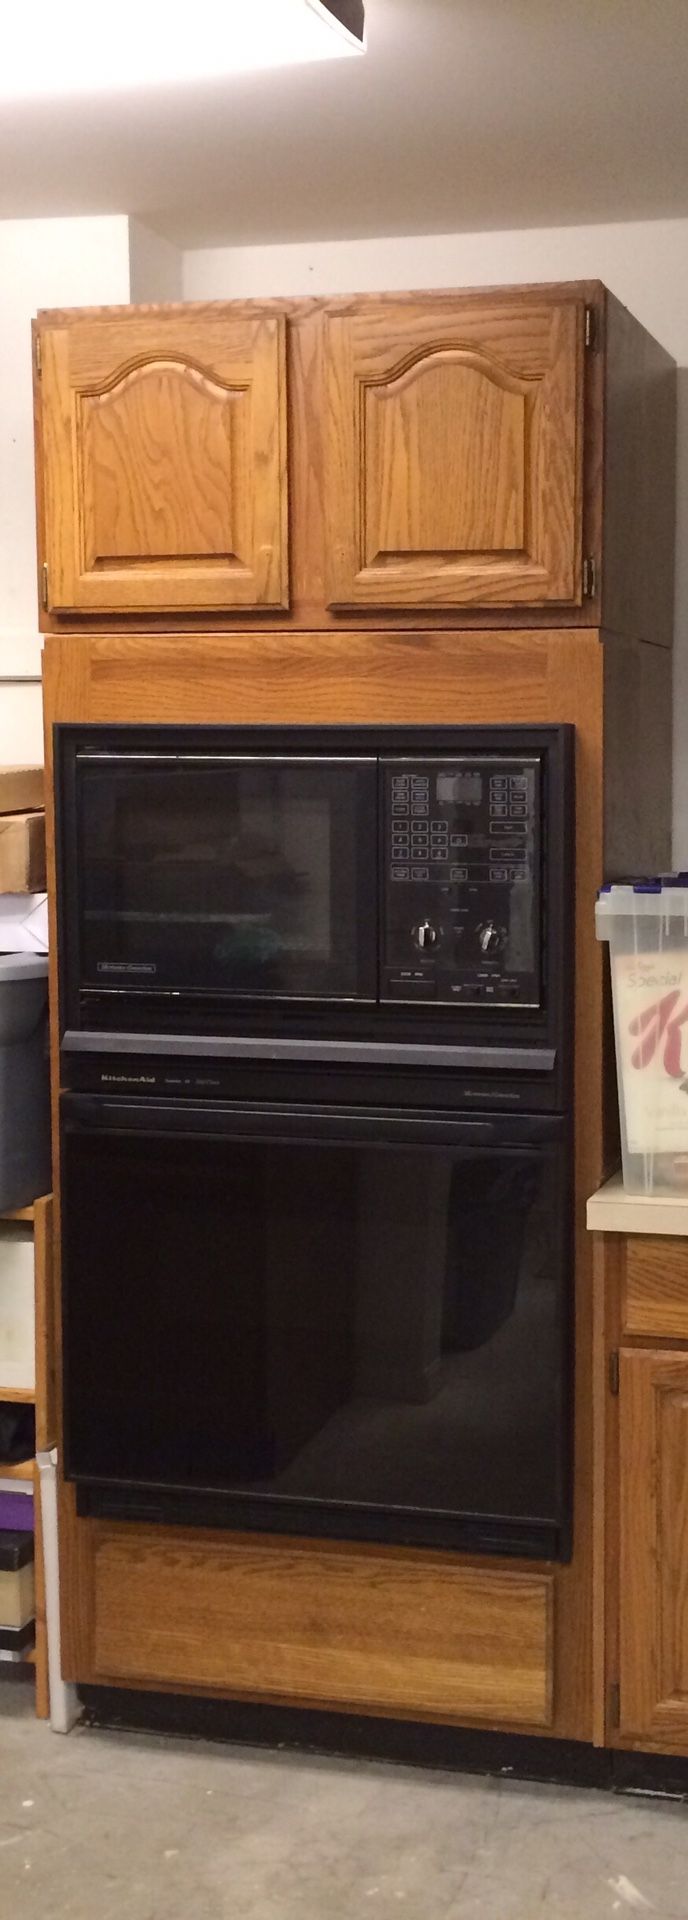 KitchenAid 30” Superba Convection Microwave Wall Oven with cabinet